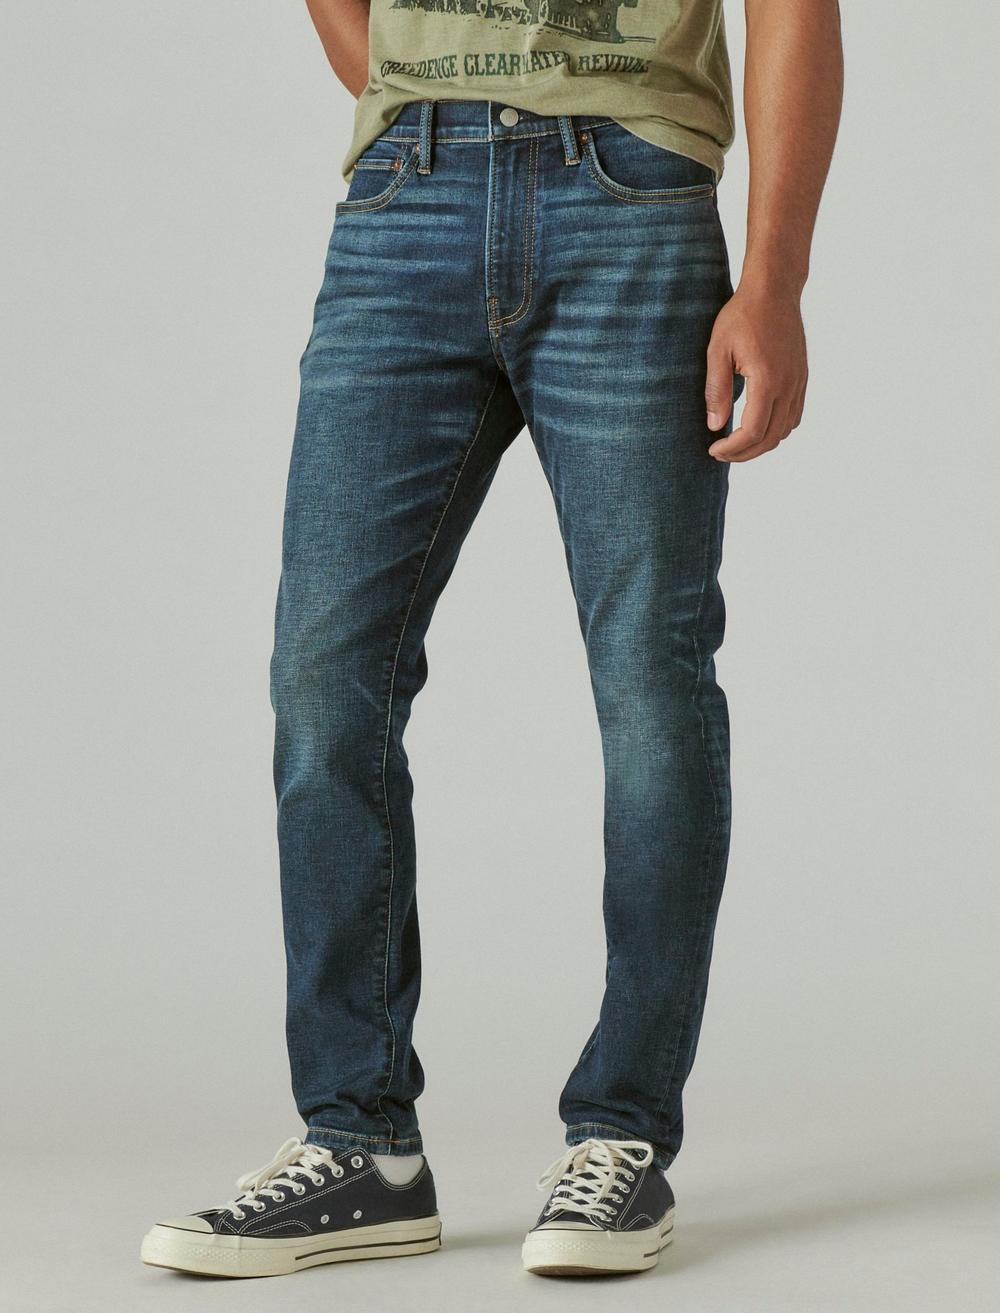 411 ATHLETIC TAPER COZY STRETCH JEAN, image 5